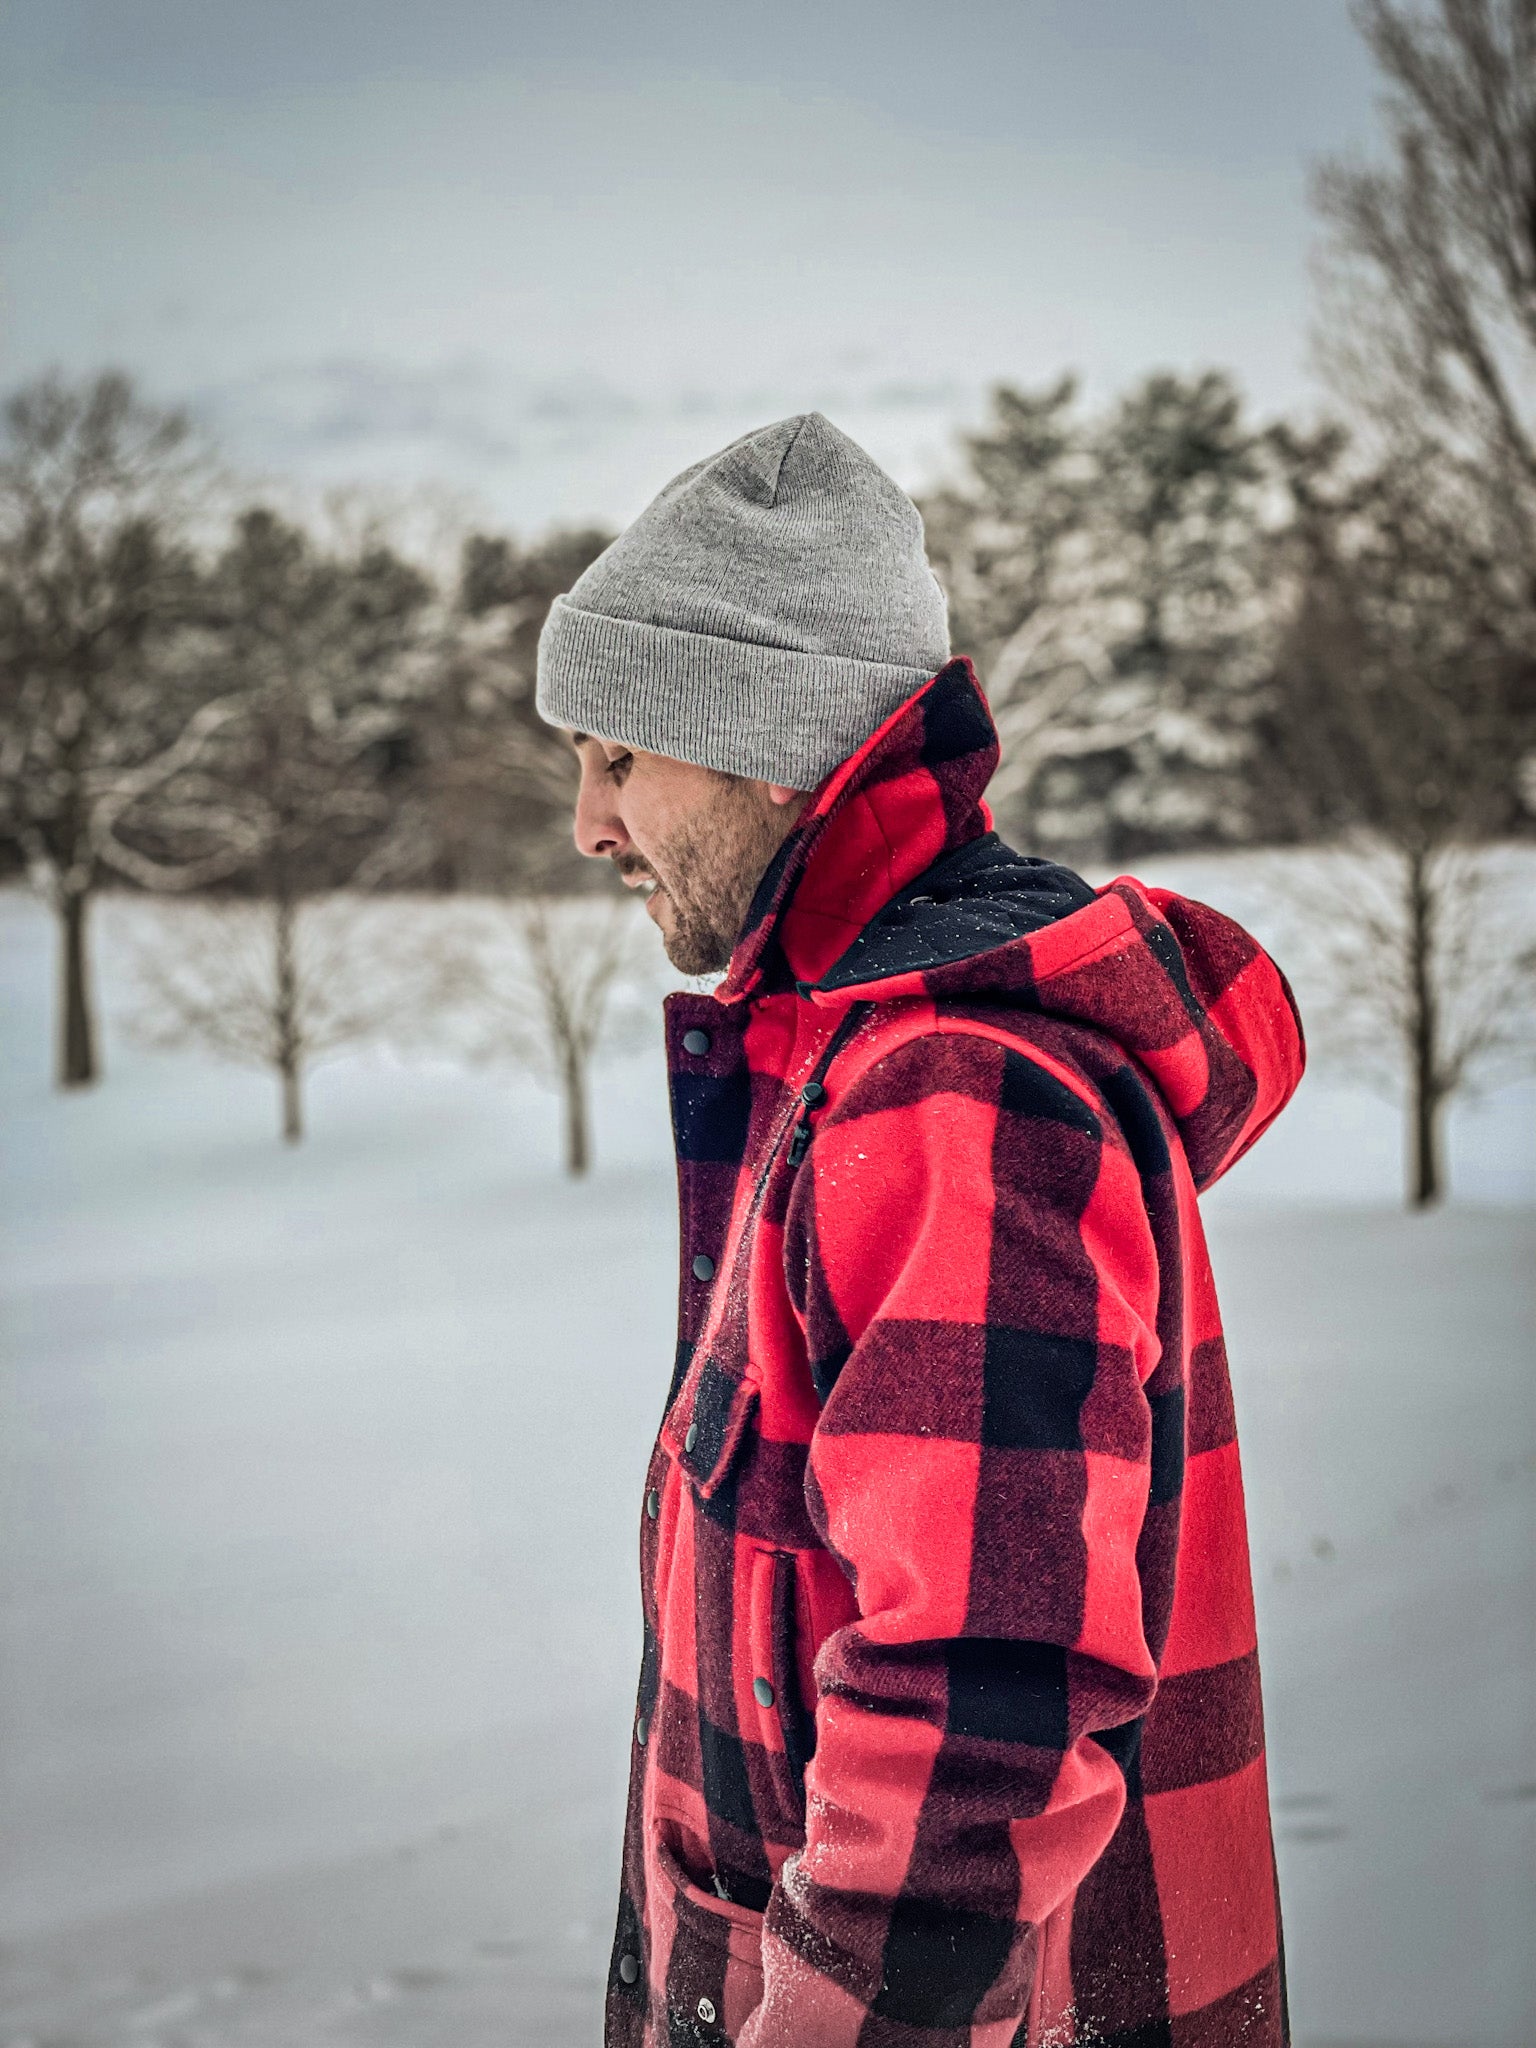 Man wearing outdoor coat with red & black squares & gray beanie in winter scene image